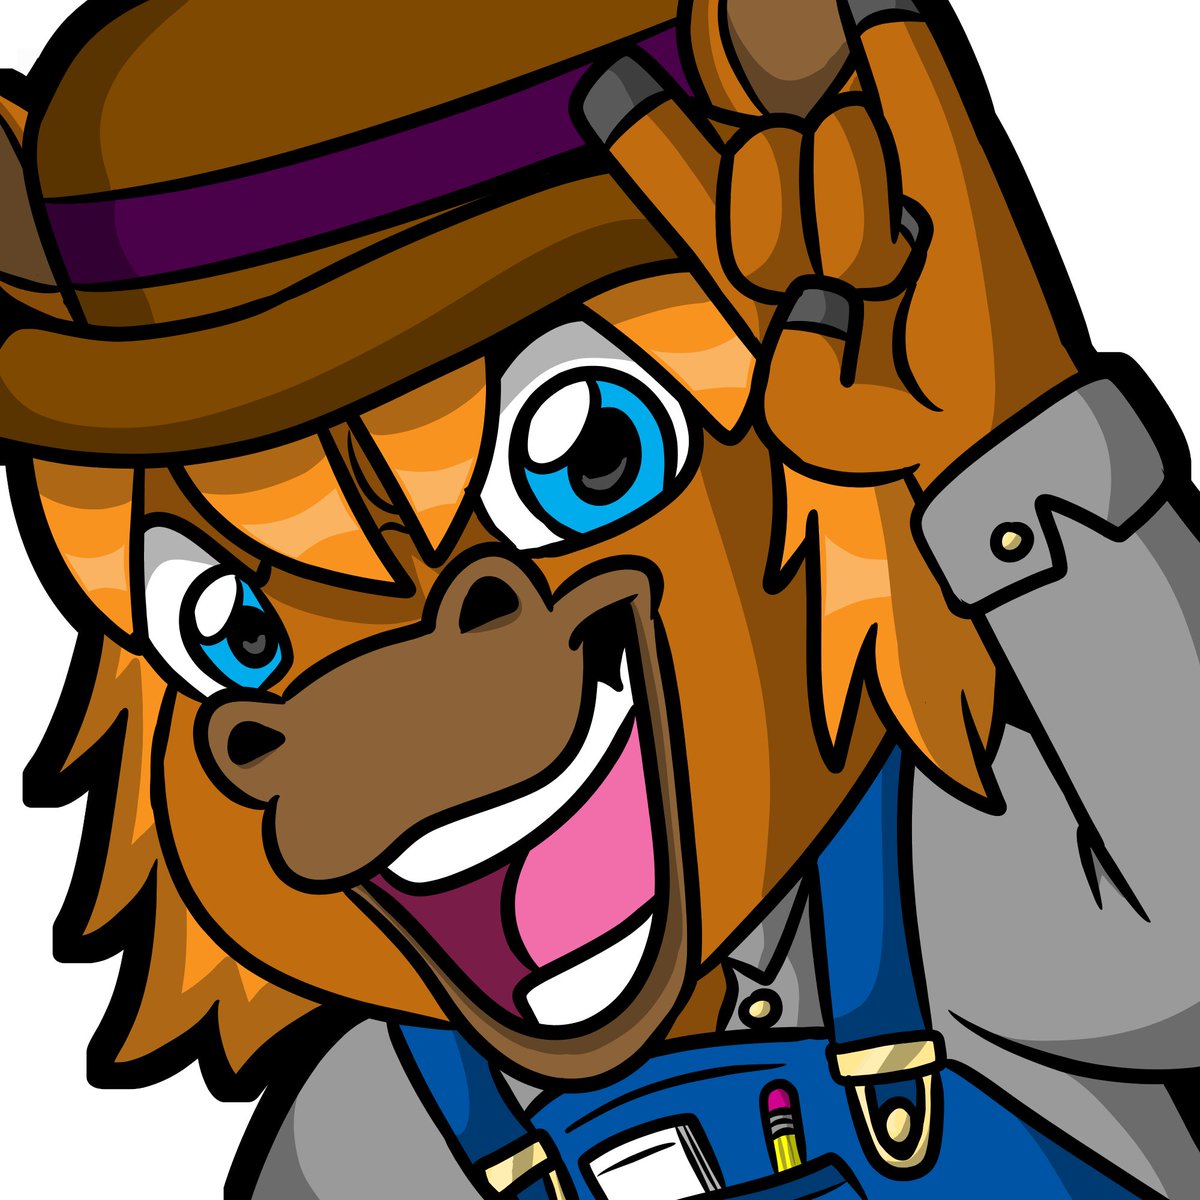 Finished another emote for SteamPony

ROCK OUT 🐴🤘